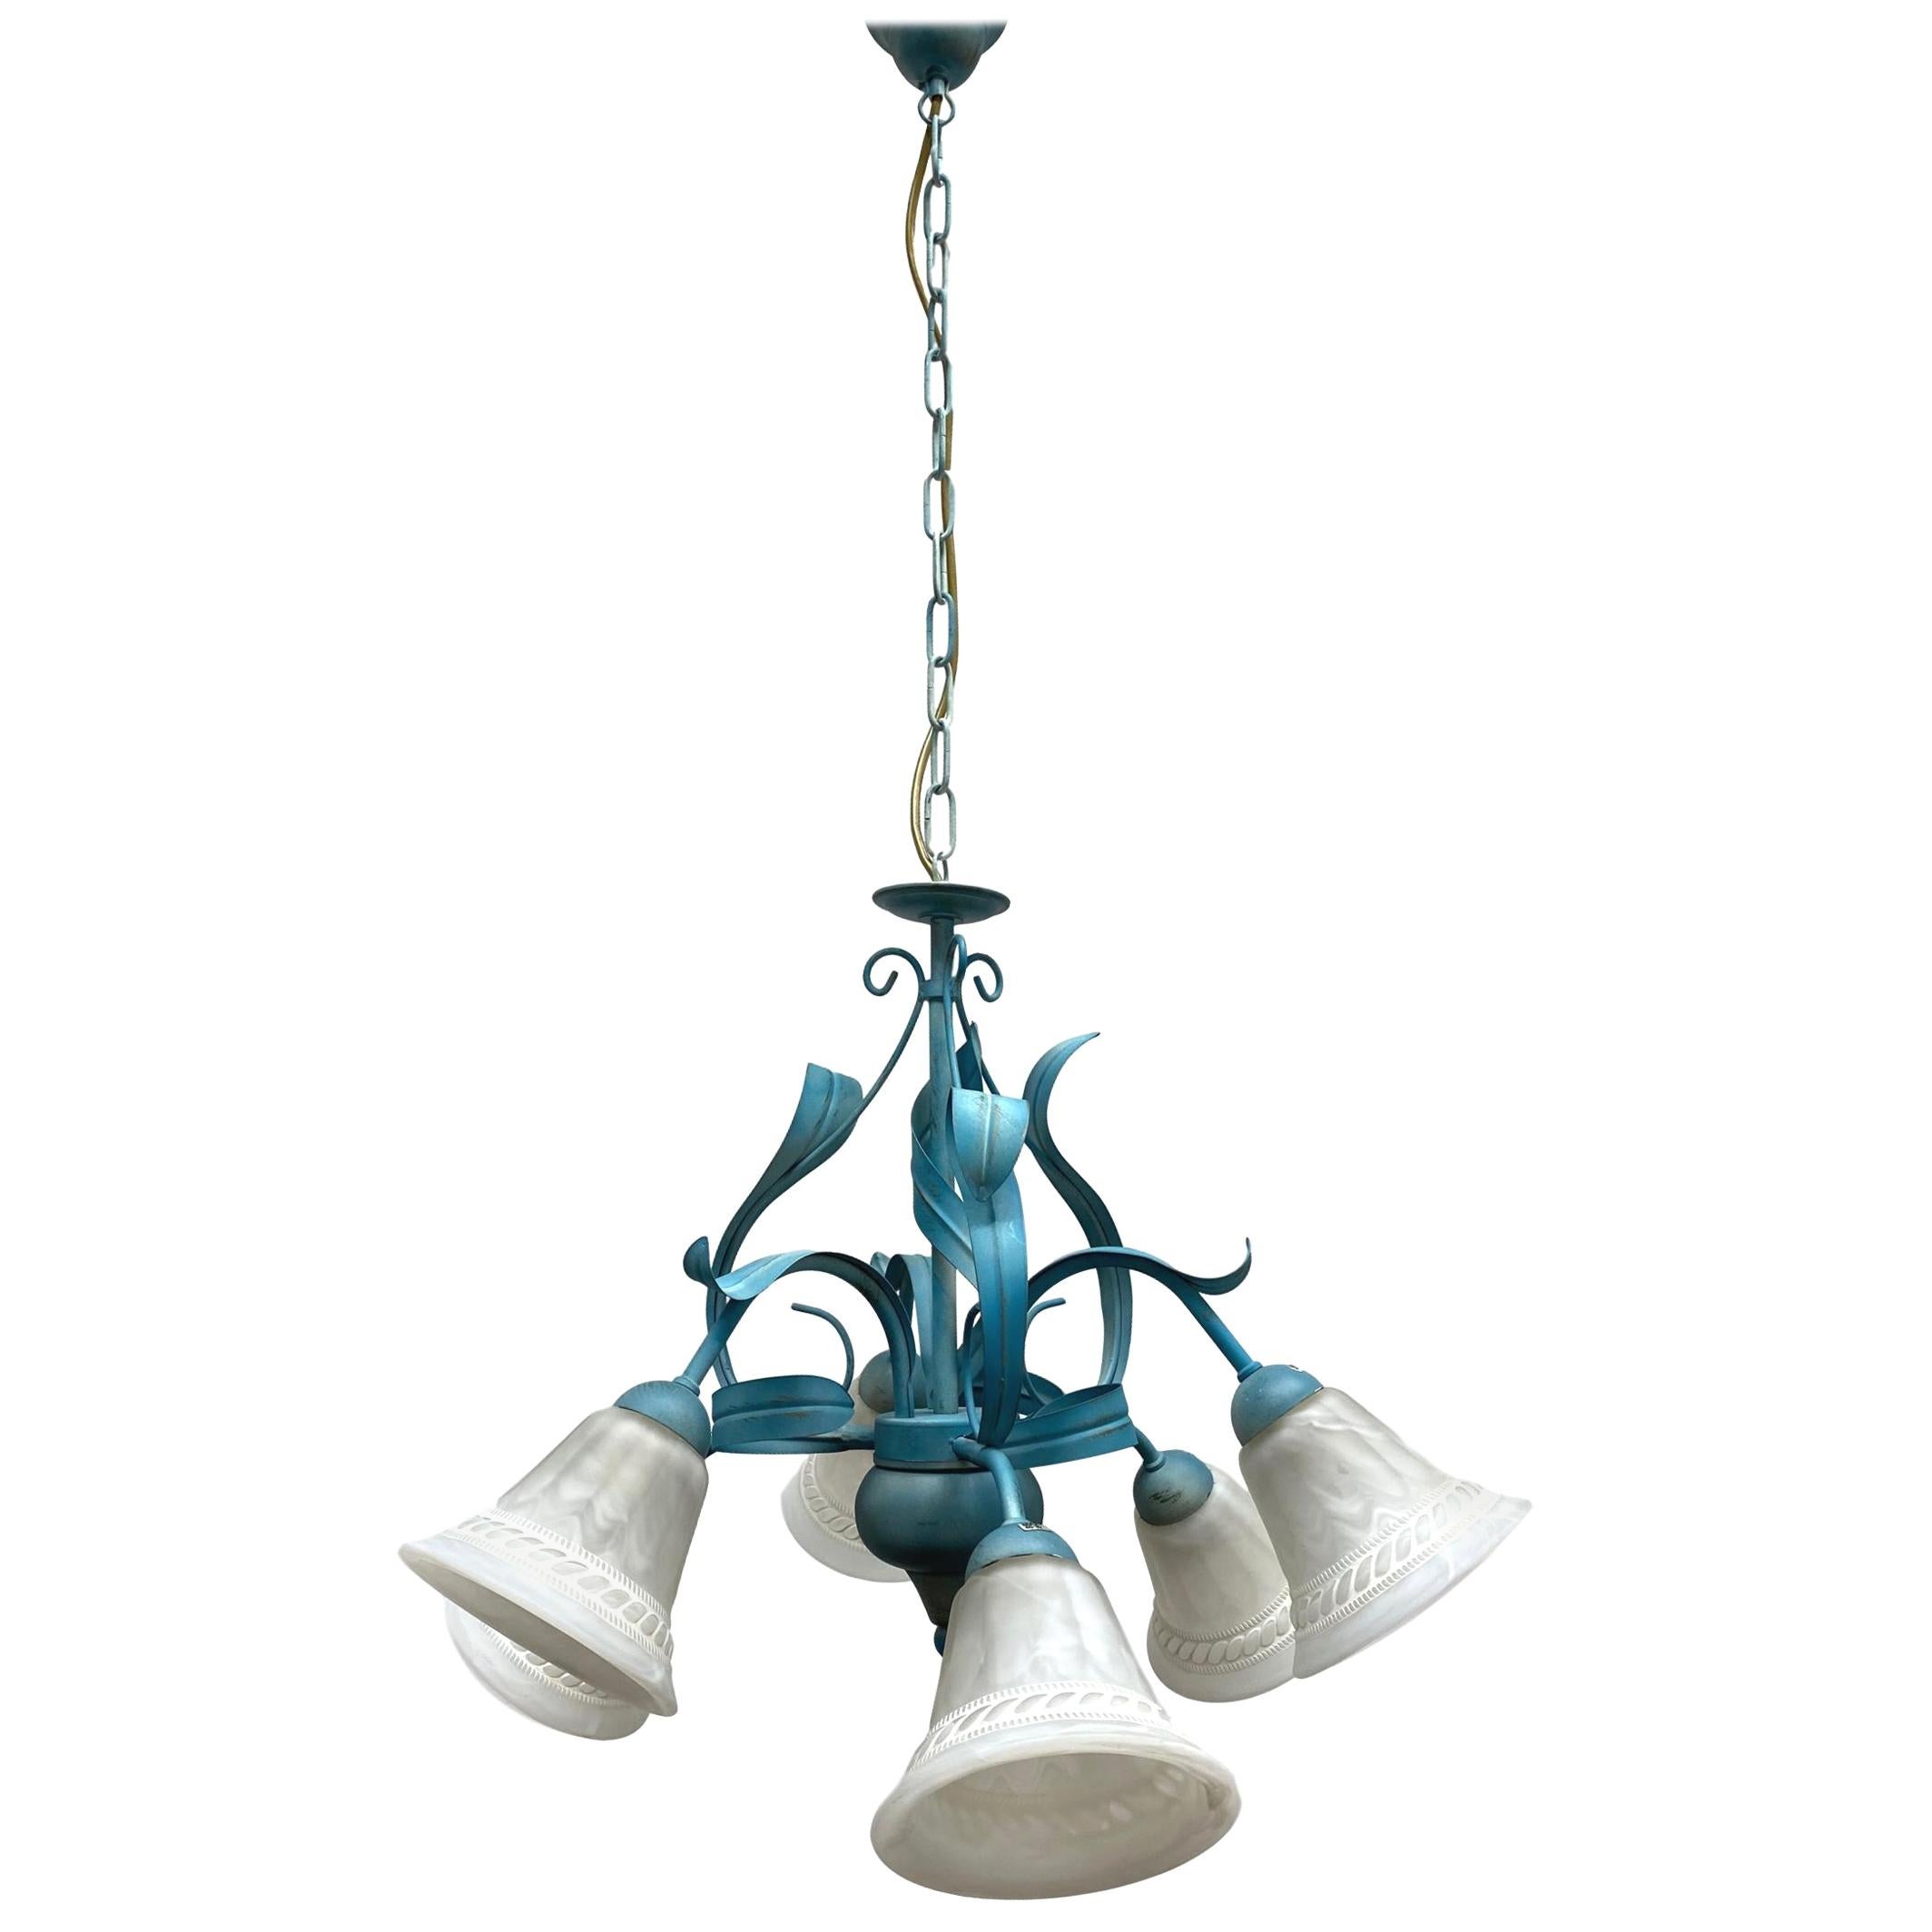 Tuscany Style Chandelier Pendant Light Glass & Blue Colored Metal, 1980s, Italy